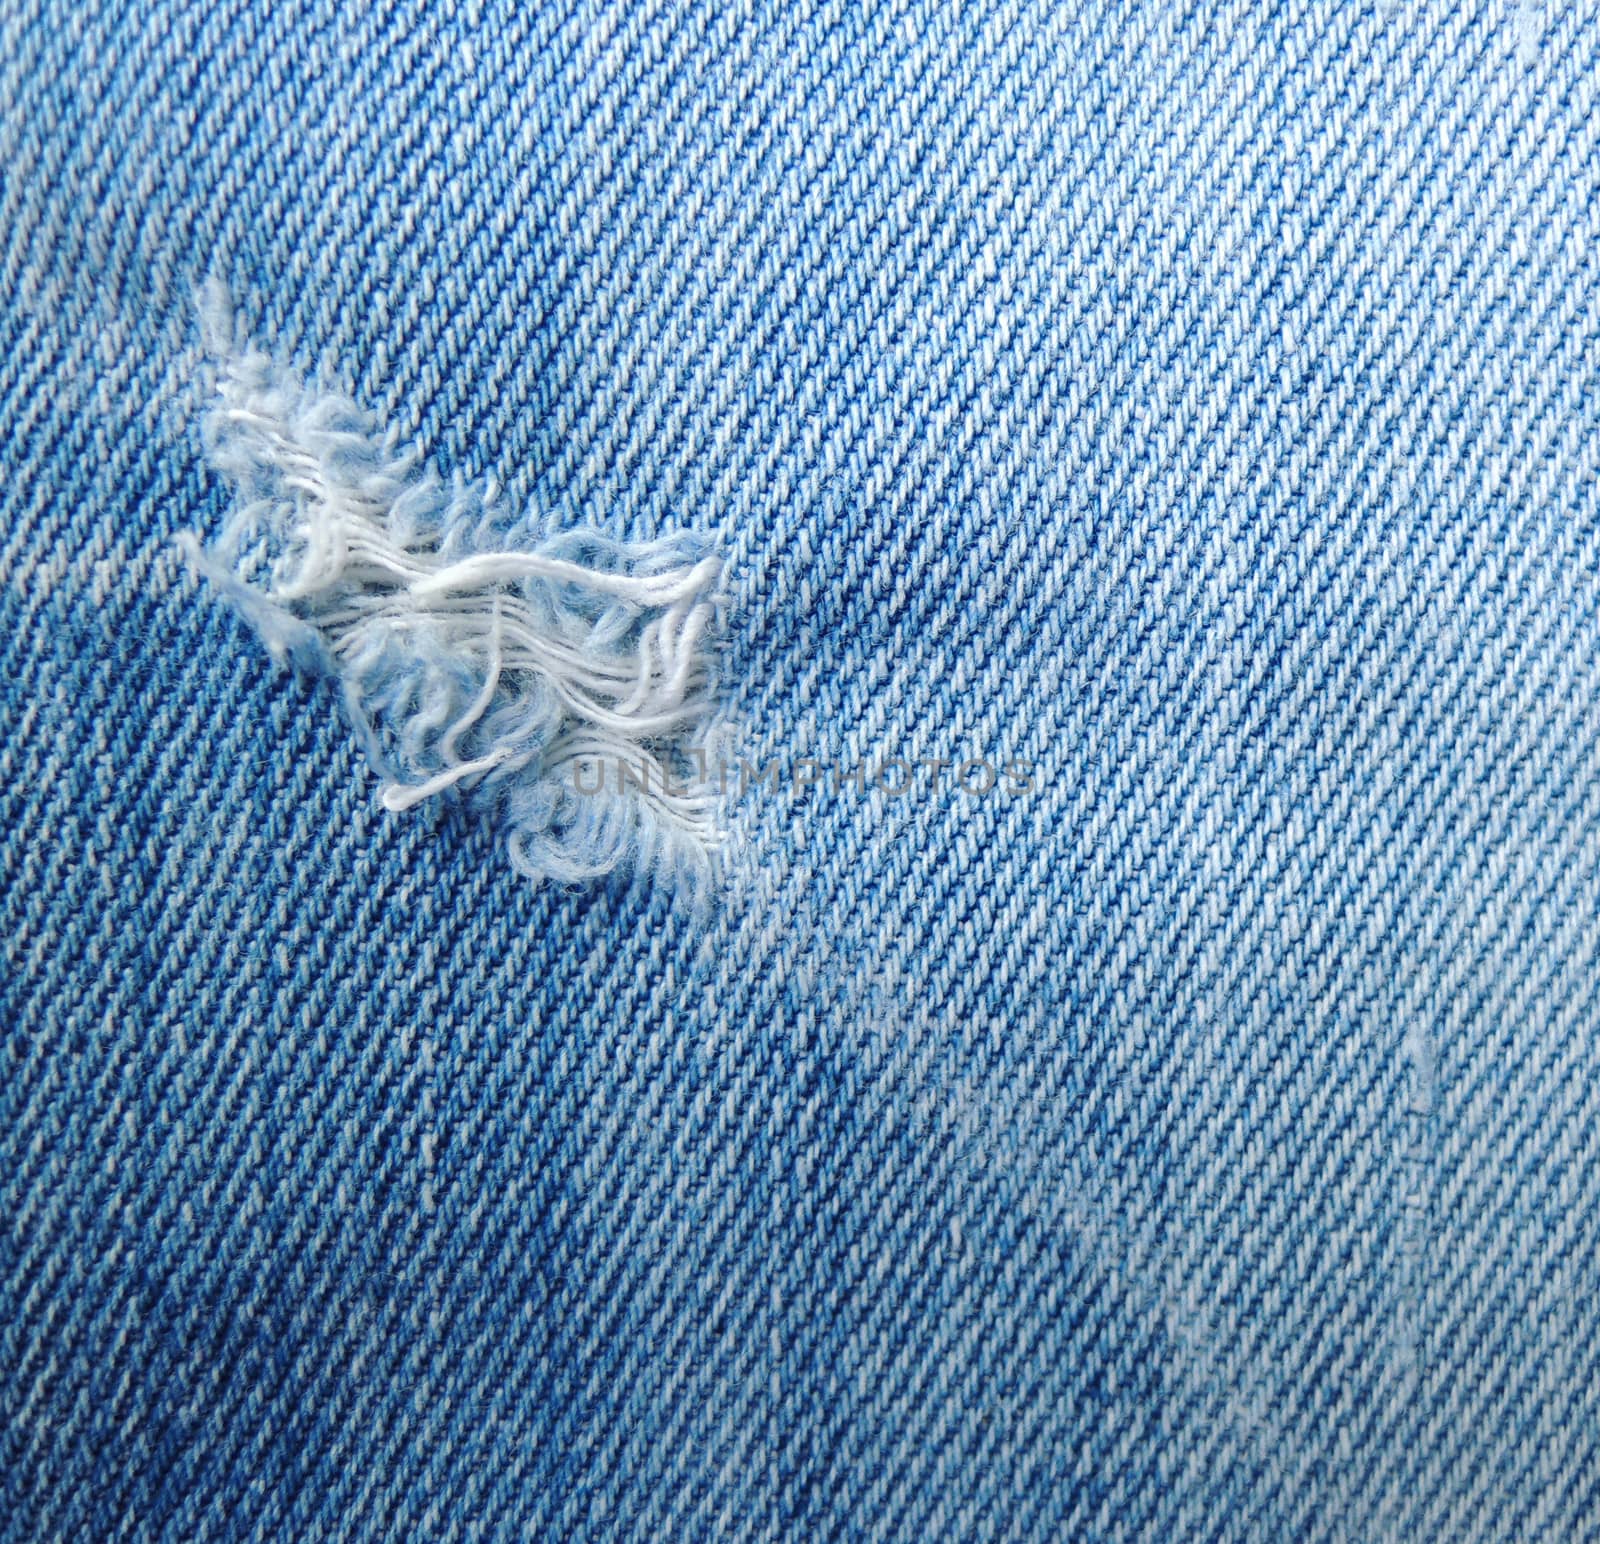 blue jean texture with a hole and threads showing

